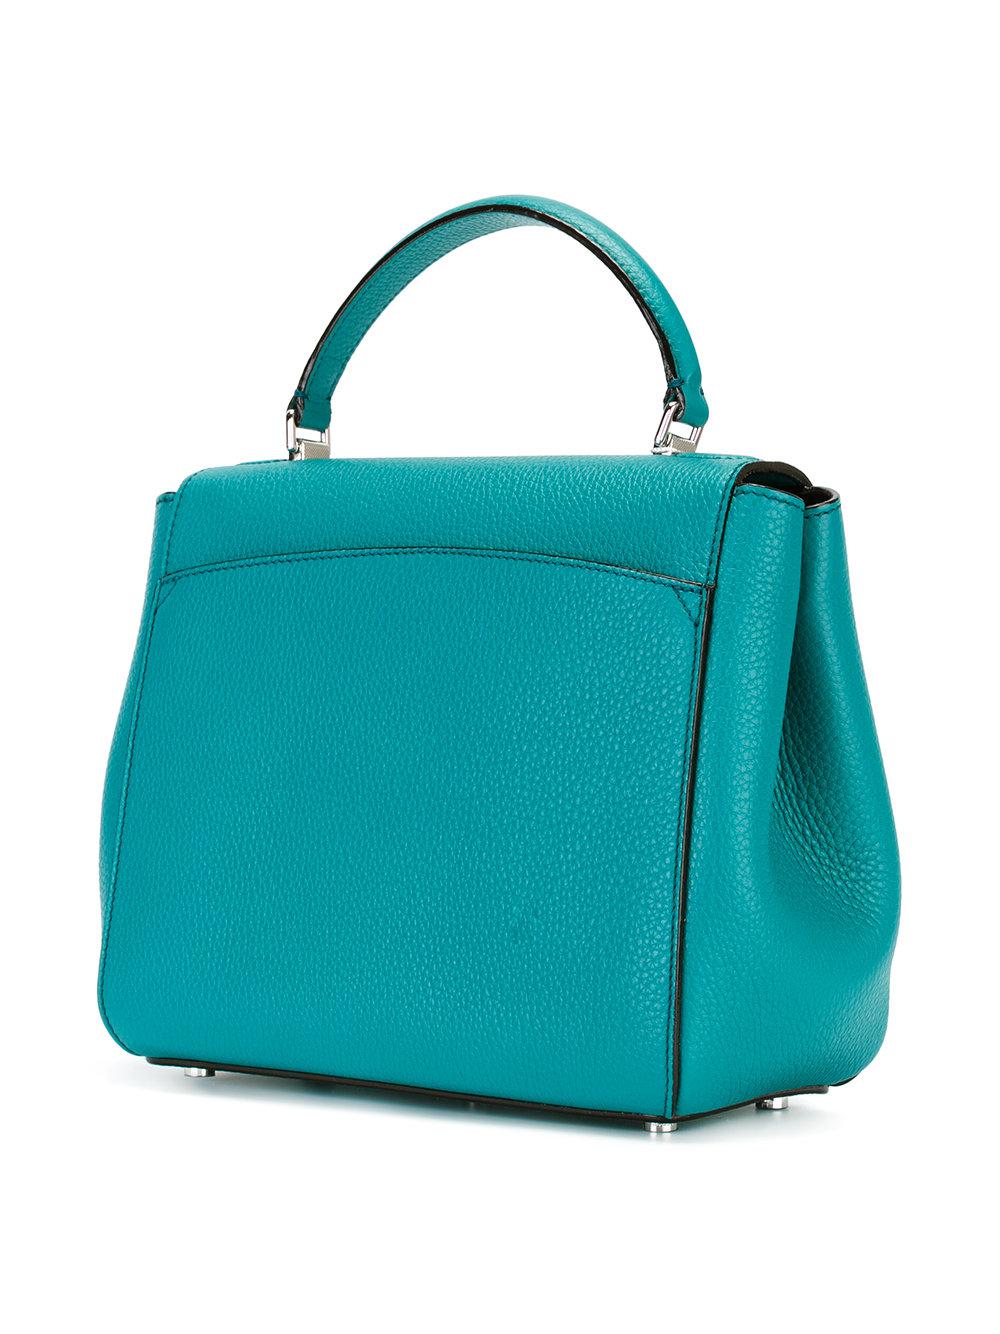 Bally Leather Flip Lock Tote Bag in Blue - Lyst